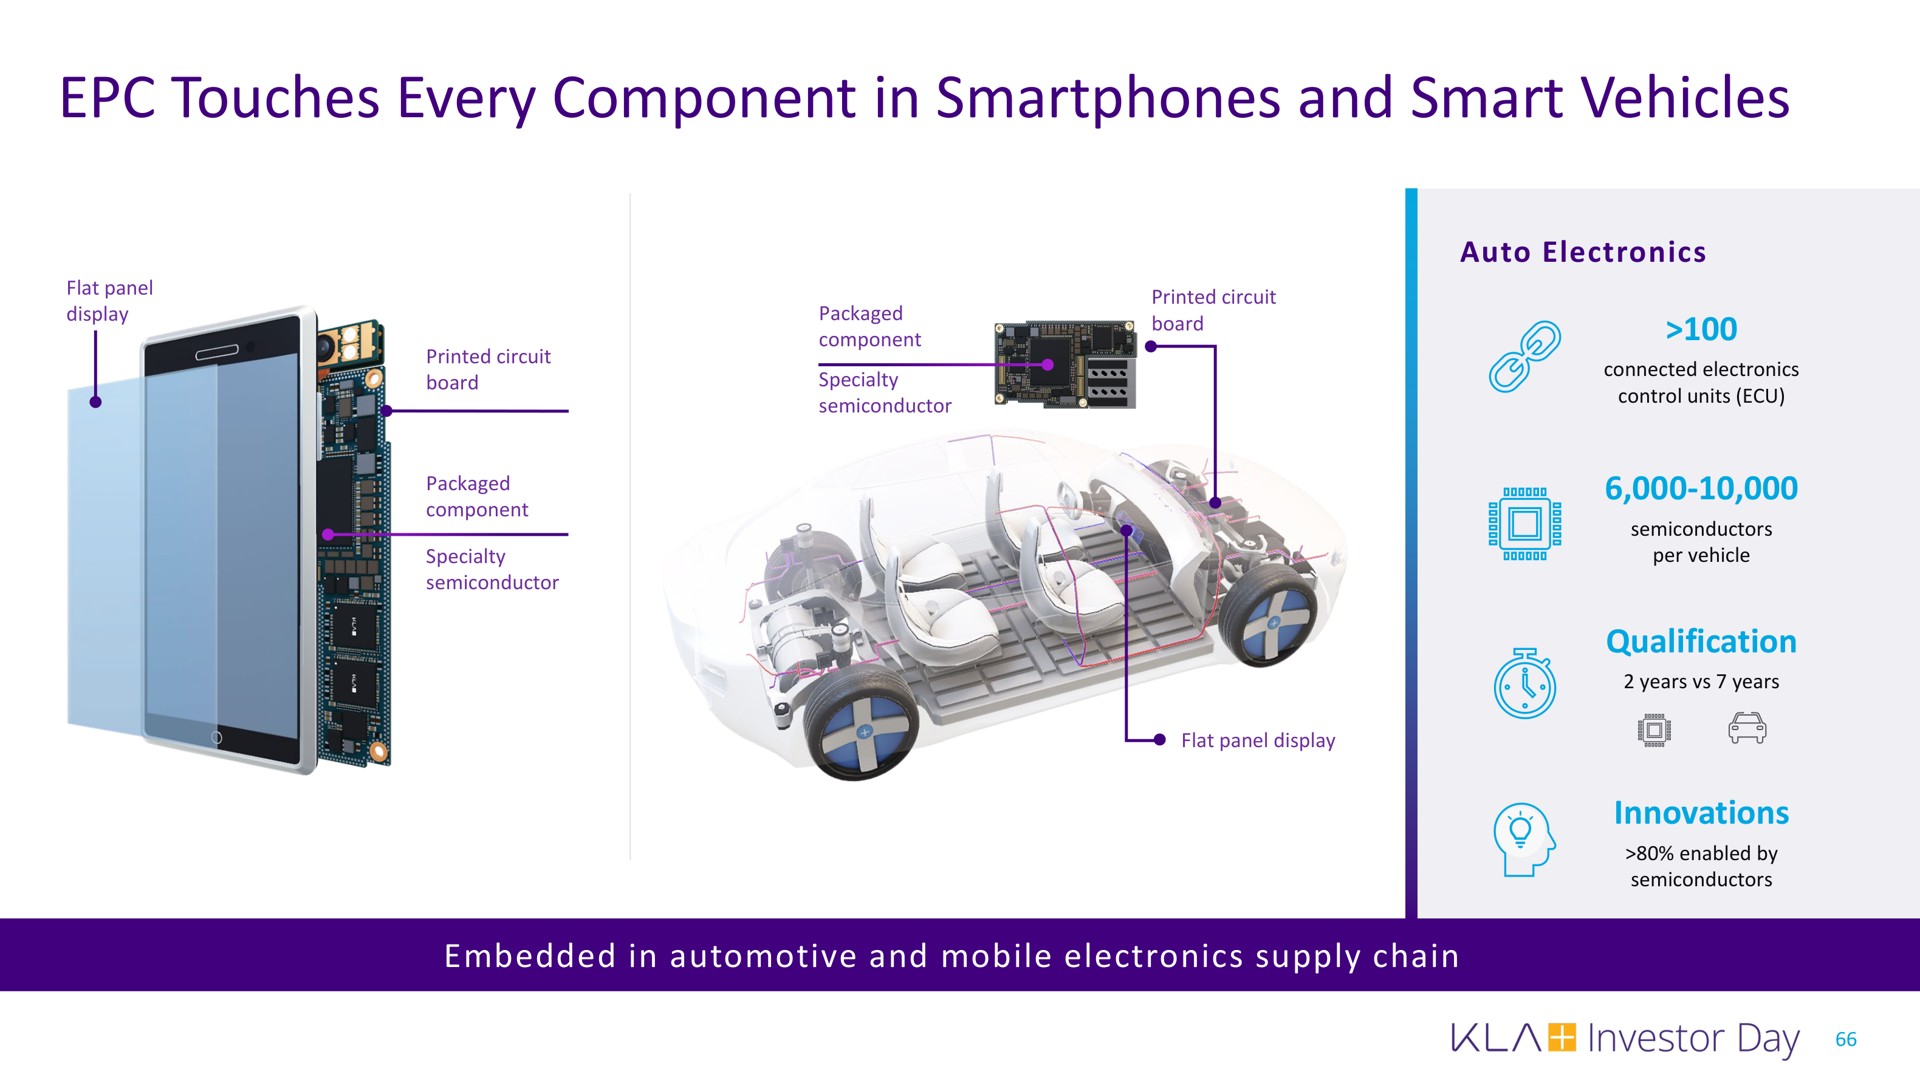 touches every component in and smart vehicles | KLA